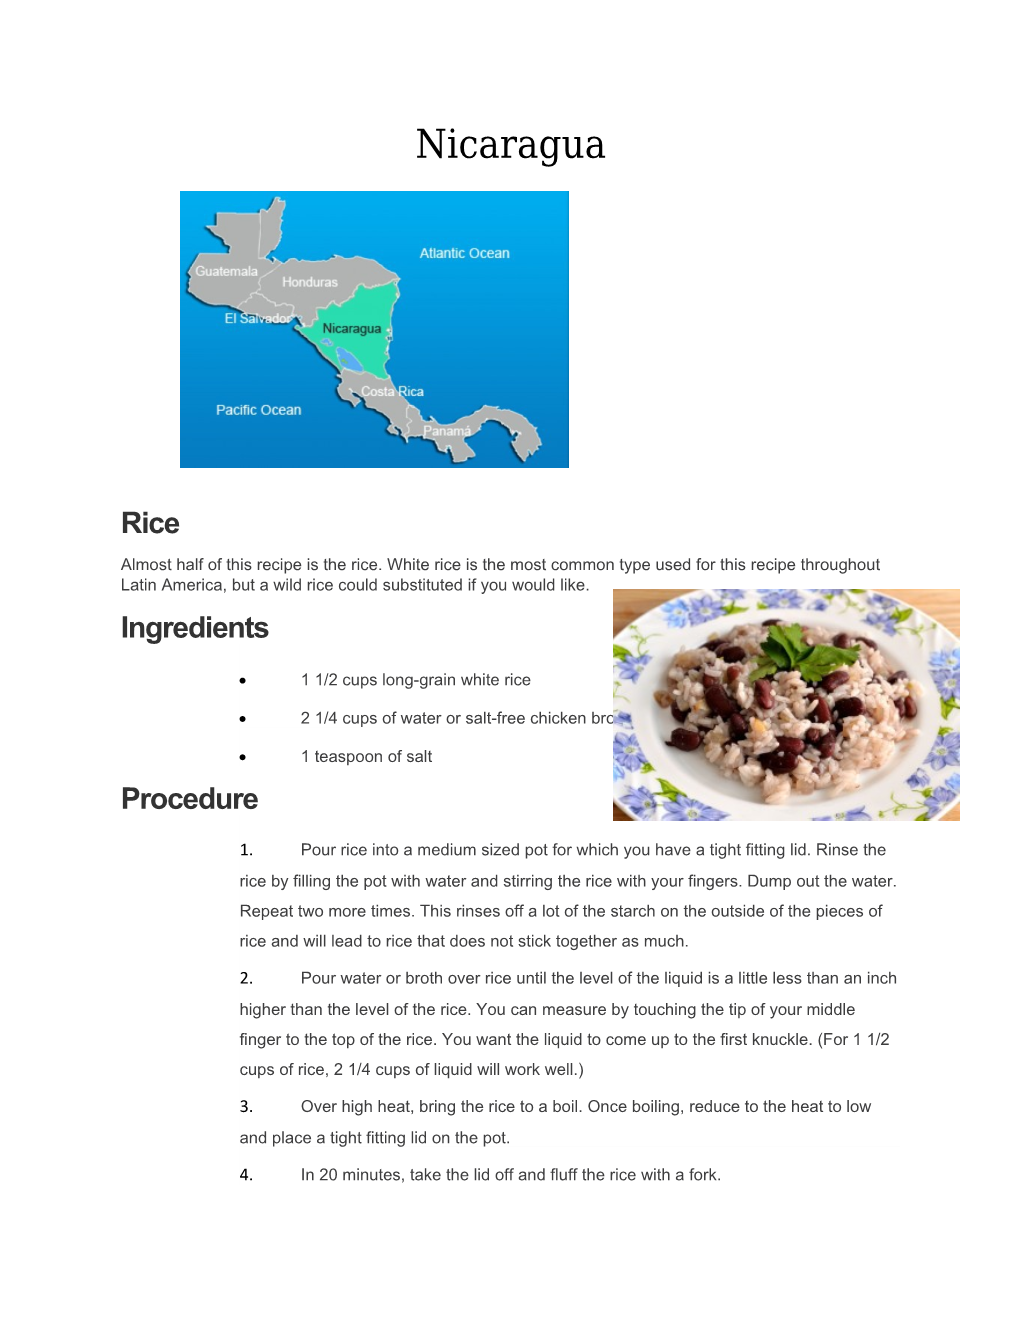 Almost Half of This Recipe Is the Rice. White Rice Is the Most Common Type Used for This